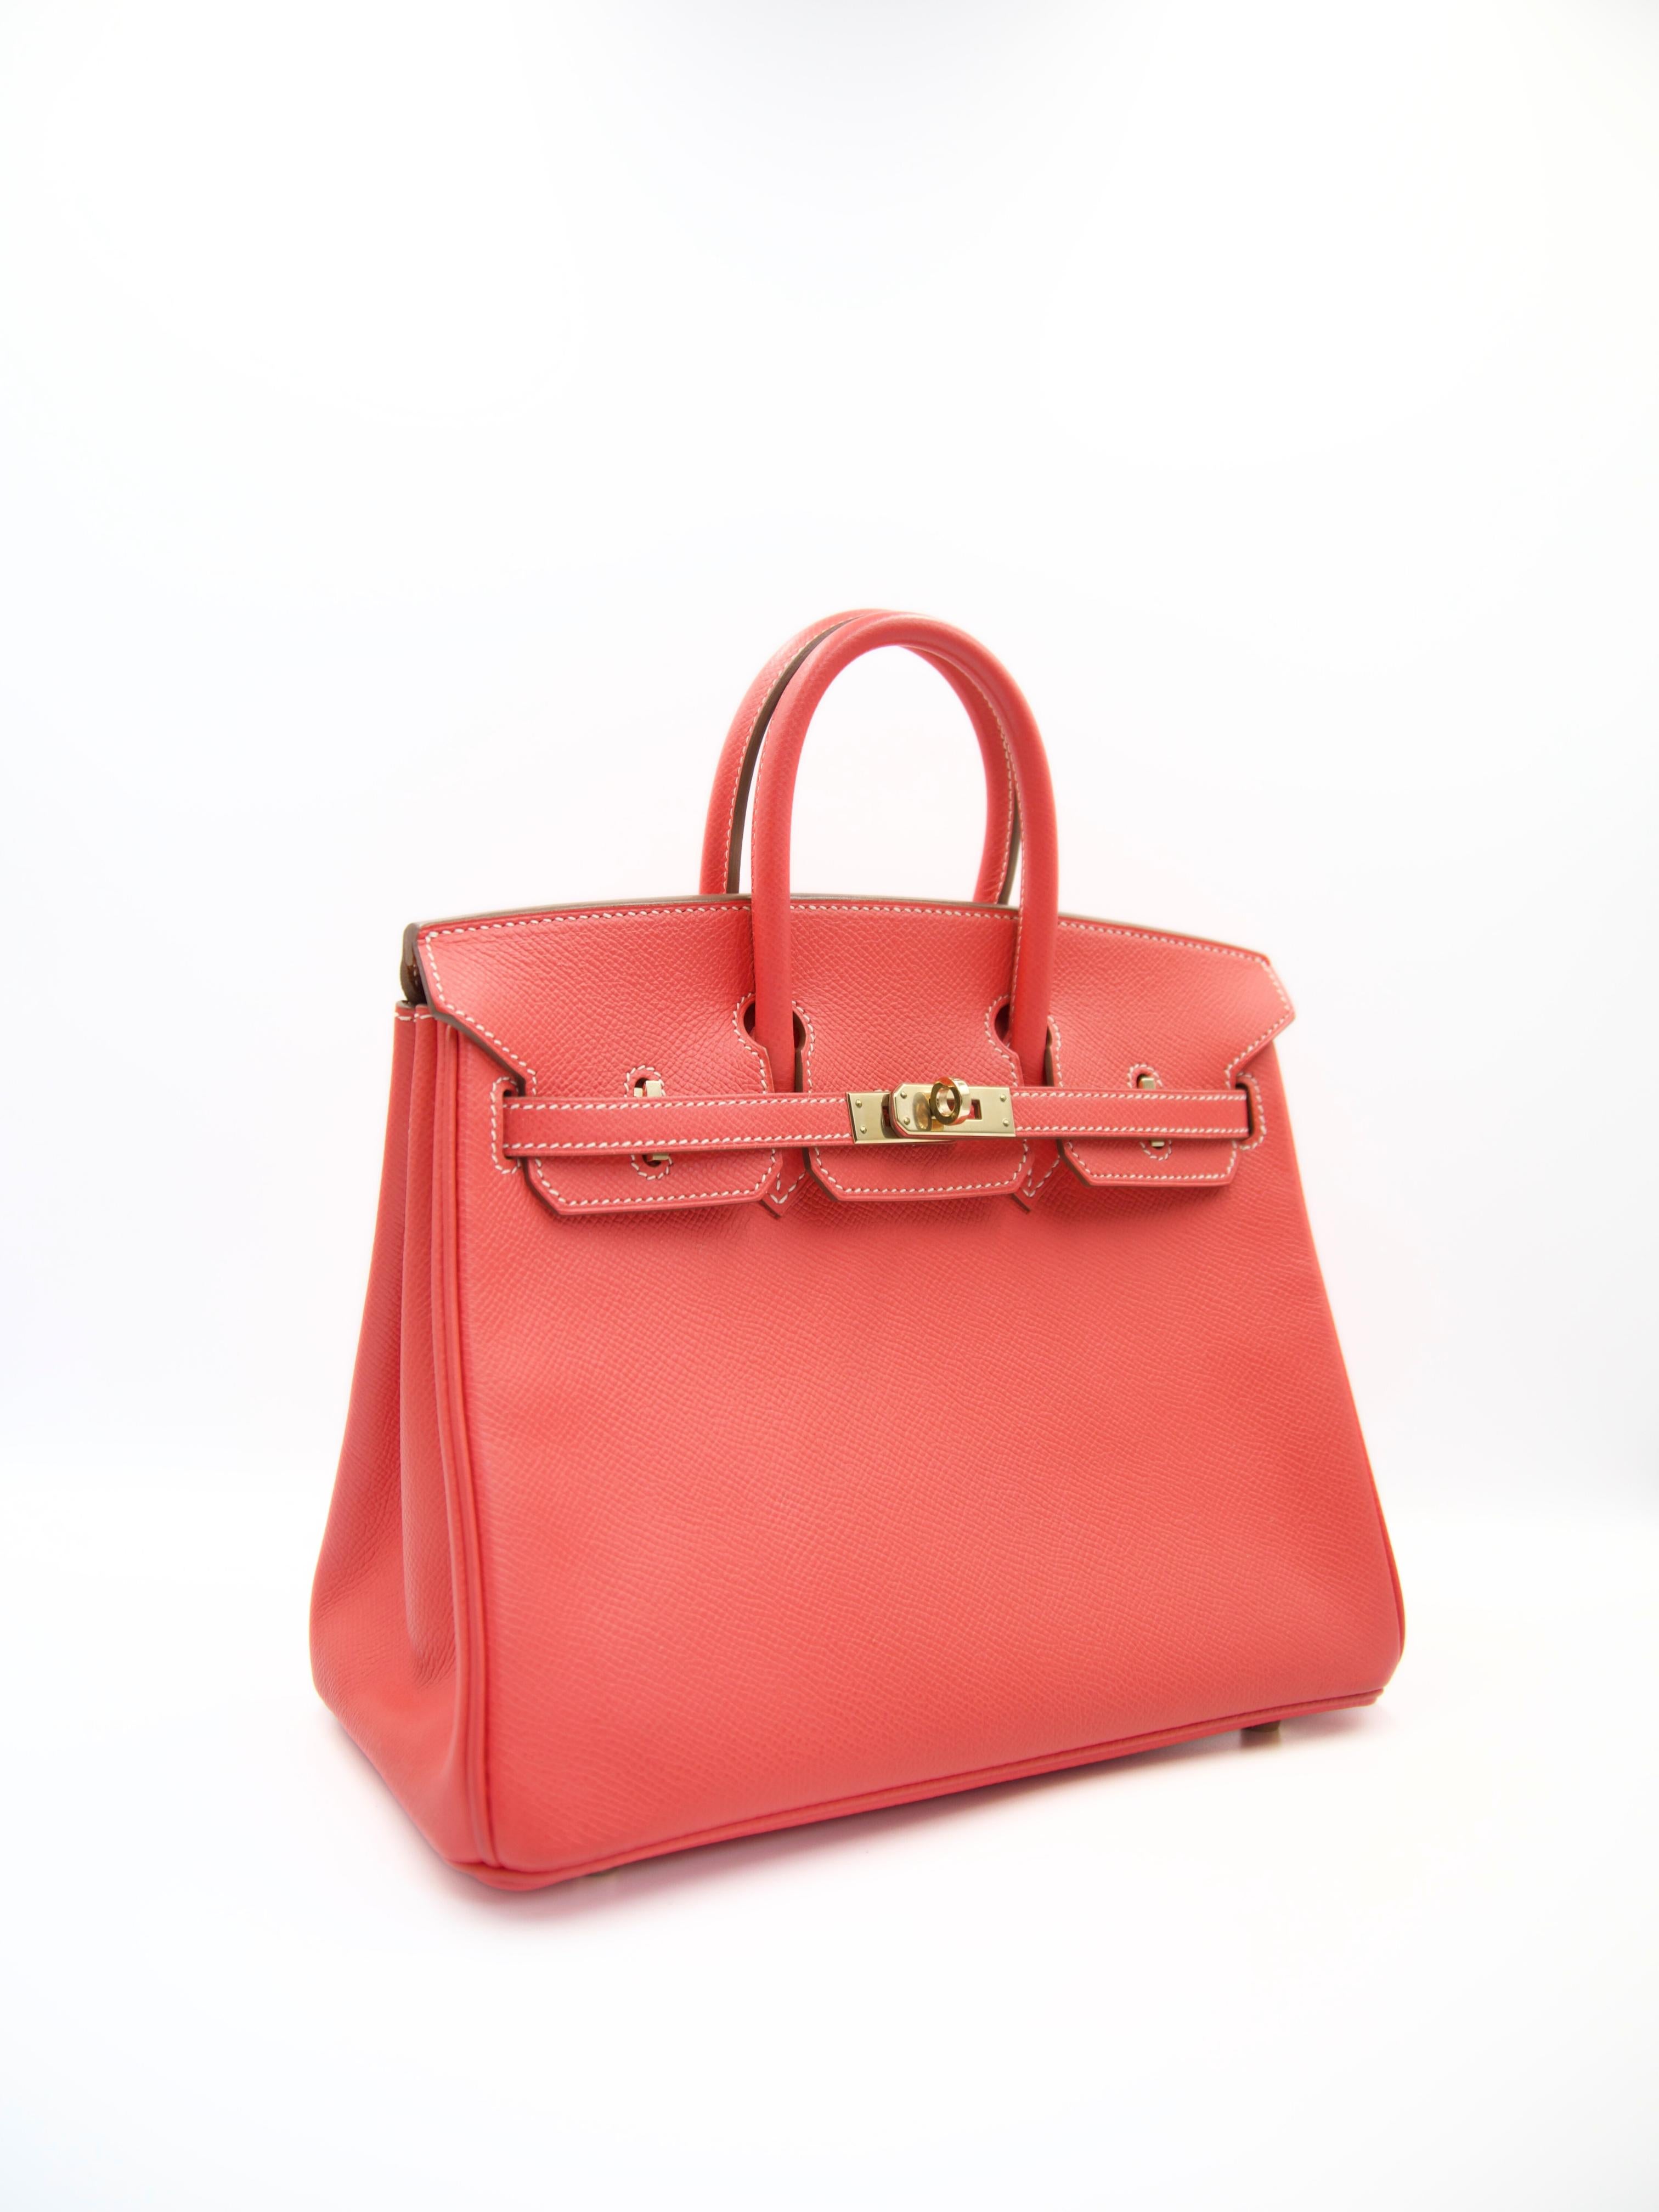 Rare Candy Collection Preloved Hermès Birkin 25cm 'Verso' in Rouge Jaipur with Gold Interior

Retourne

Epsom Leather with Permabrass Hardware

O Stamp / Copy Receipt 

Preloved Condition: Excellent 

Measurements: 10